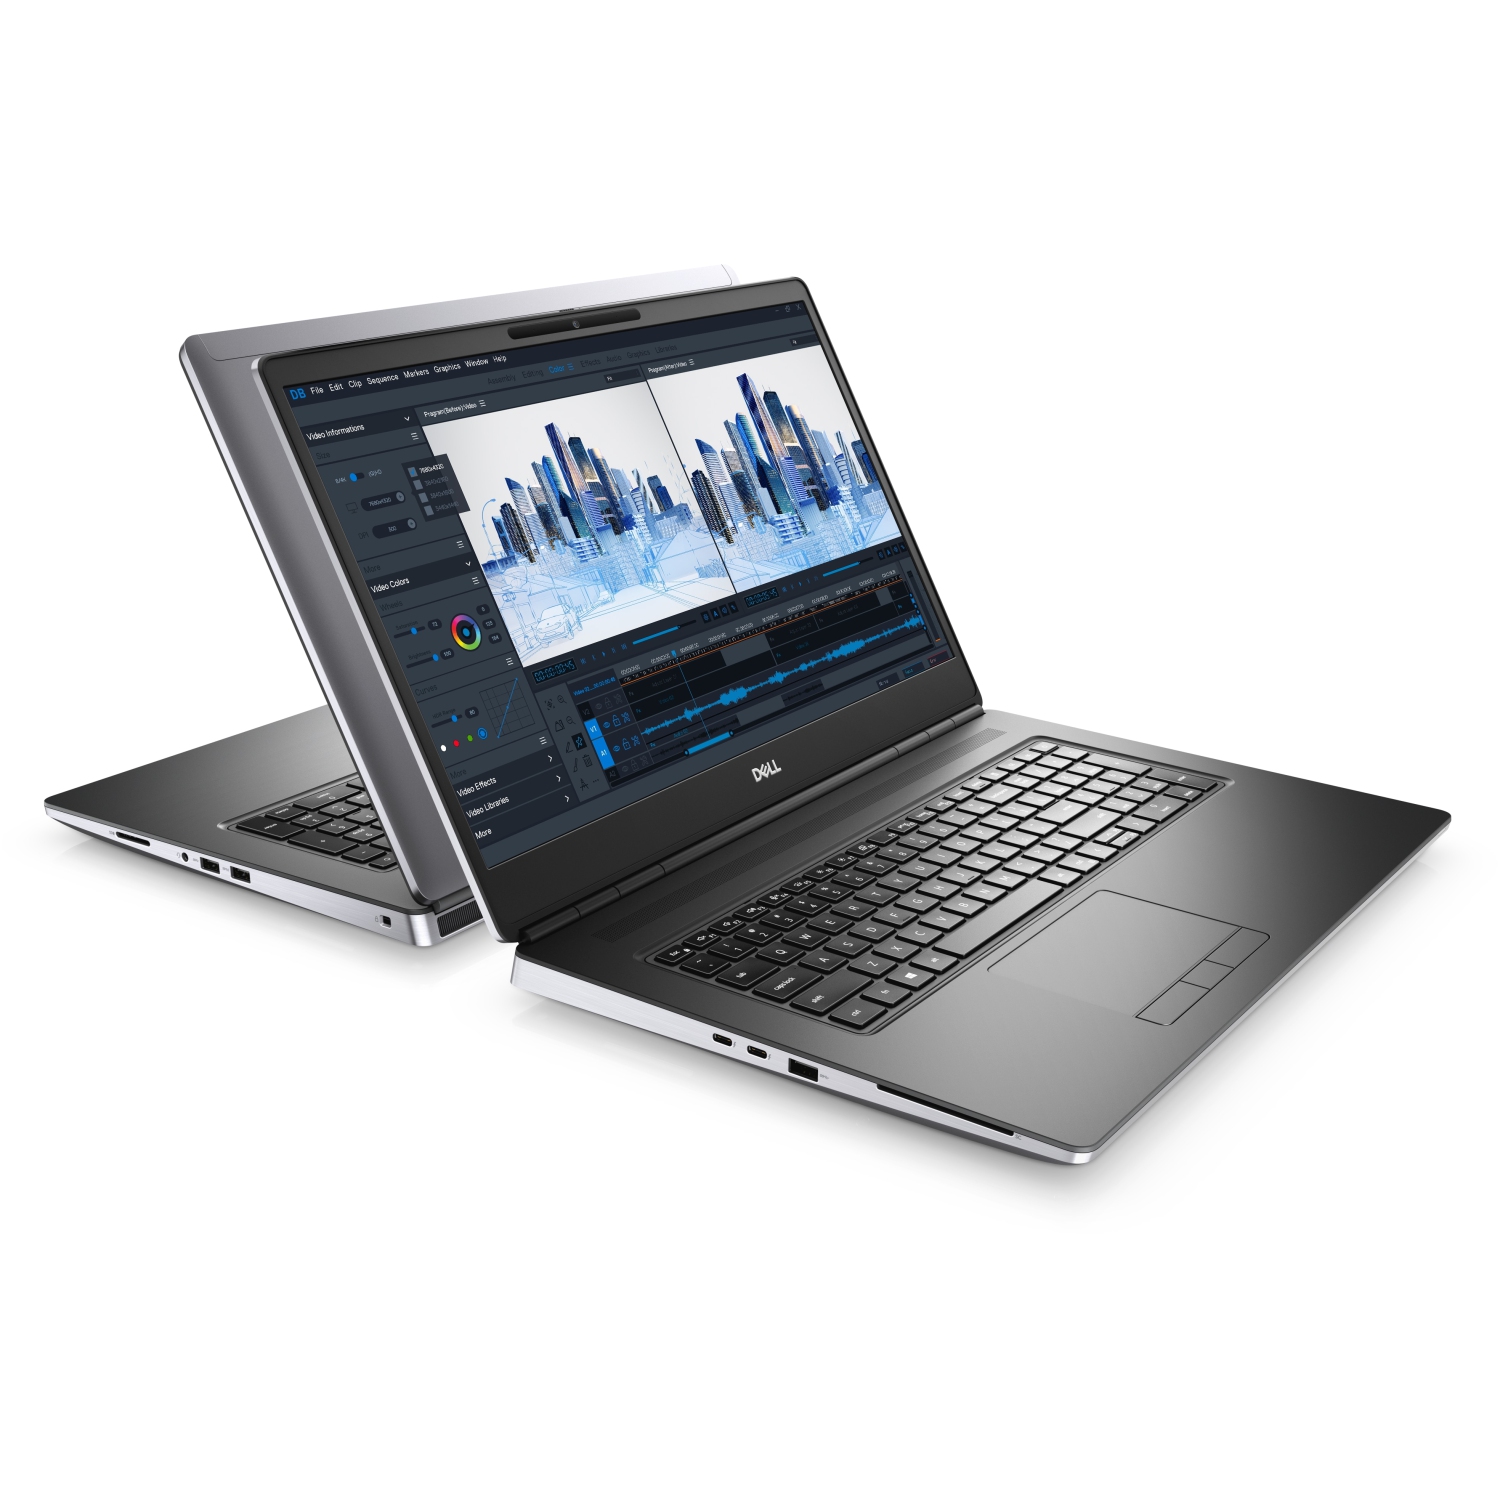 Refurbished (Excellent) - Dell Precision 7000 7760 Workstation Laptop (2021), 17.3" FHD, Core i7, 512GB SSD, 32GB RAM, RTX A4000, 4.8 GHz, 11th Gen CPU Certified